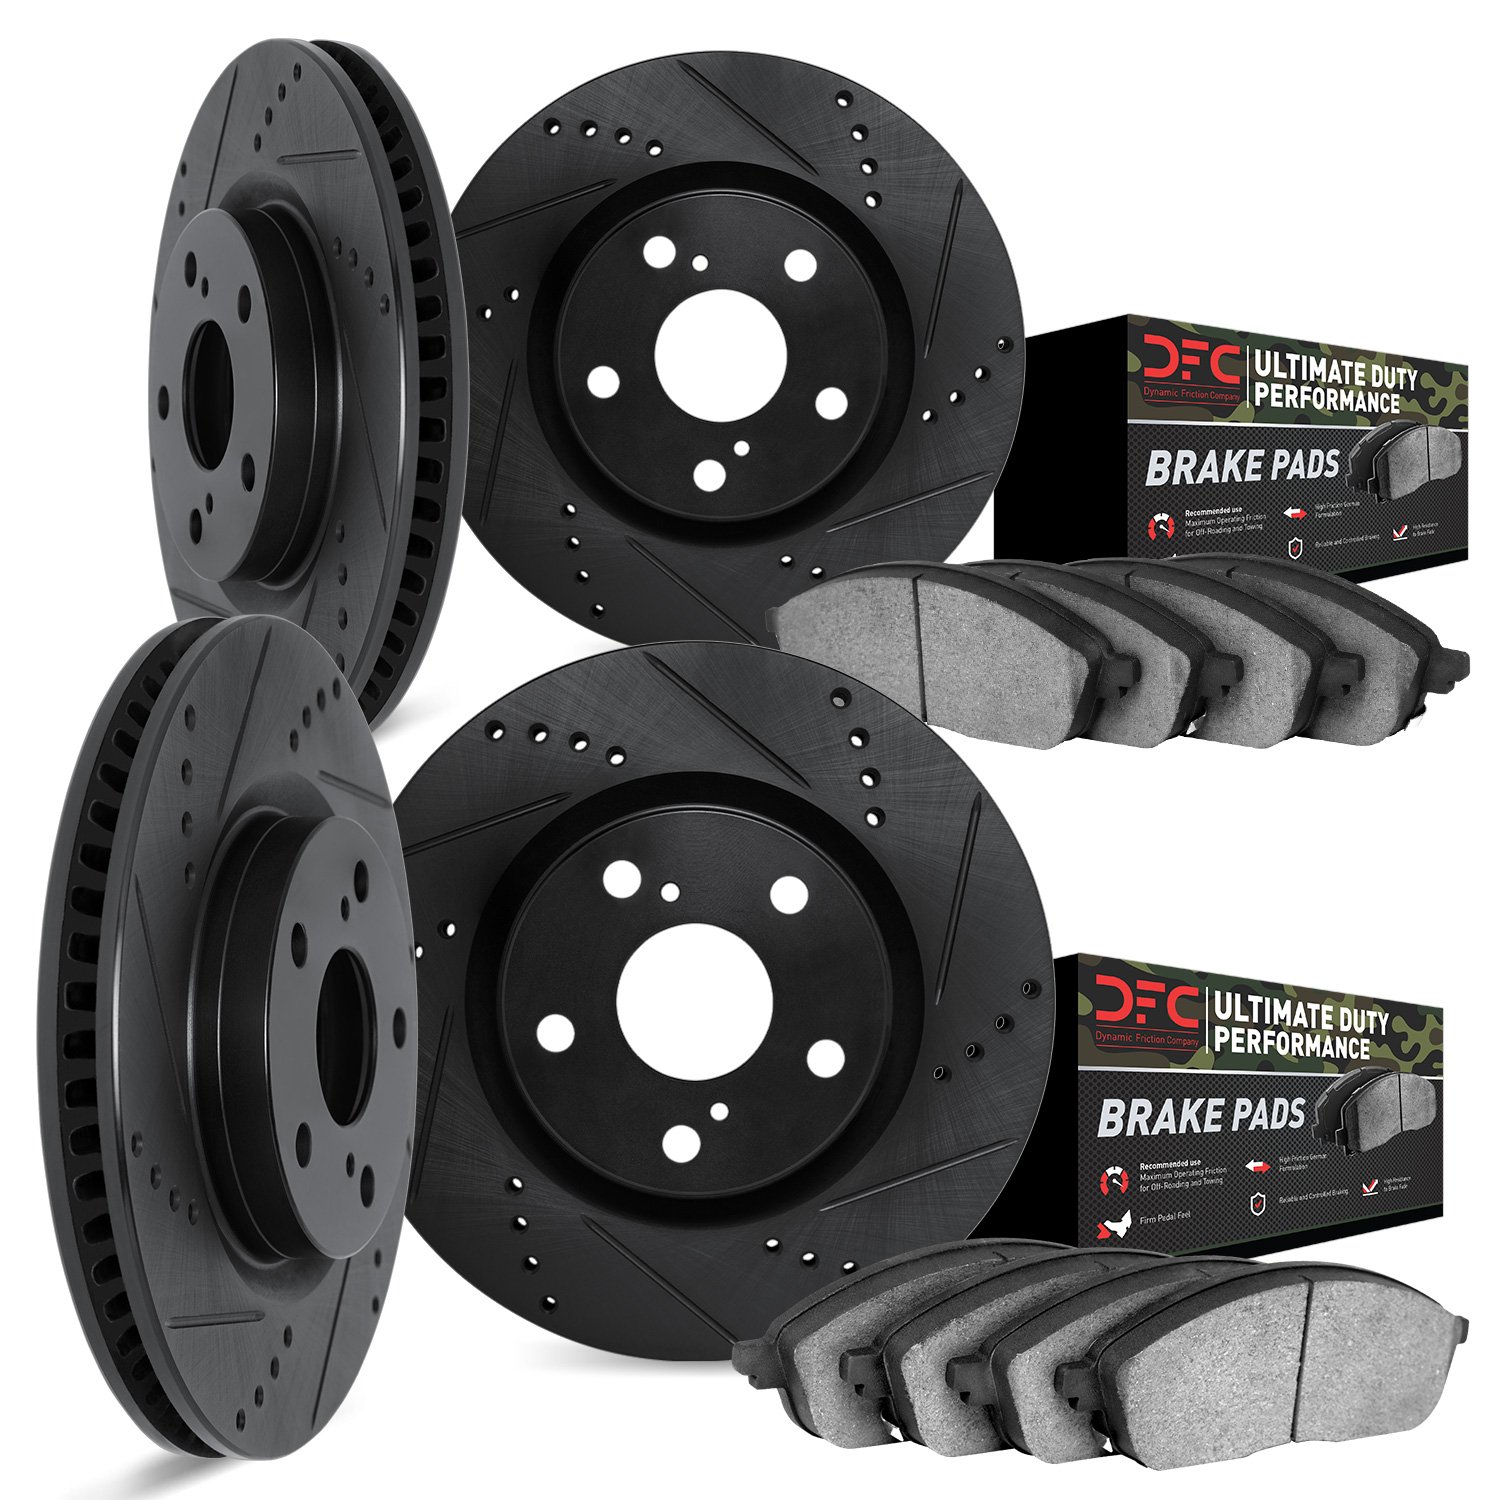 8404-47001 Drilled/Slotted Brake Rotors with Ultimate-Duty Brake Pads Kit [Black], 1989-1992 GM, Position: Front and Rear